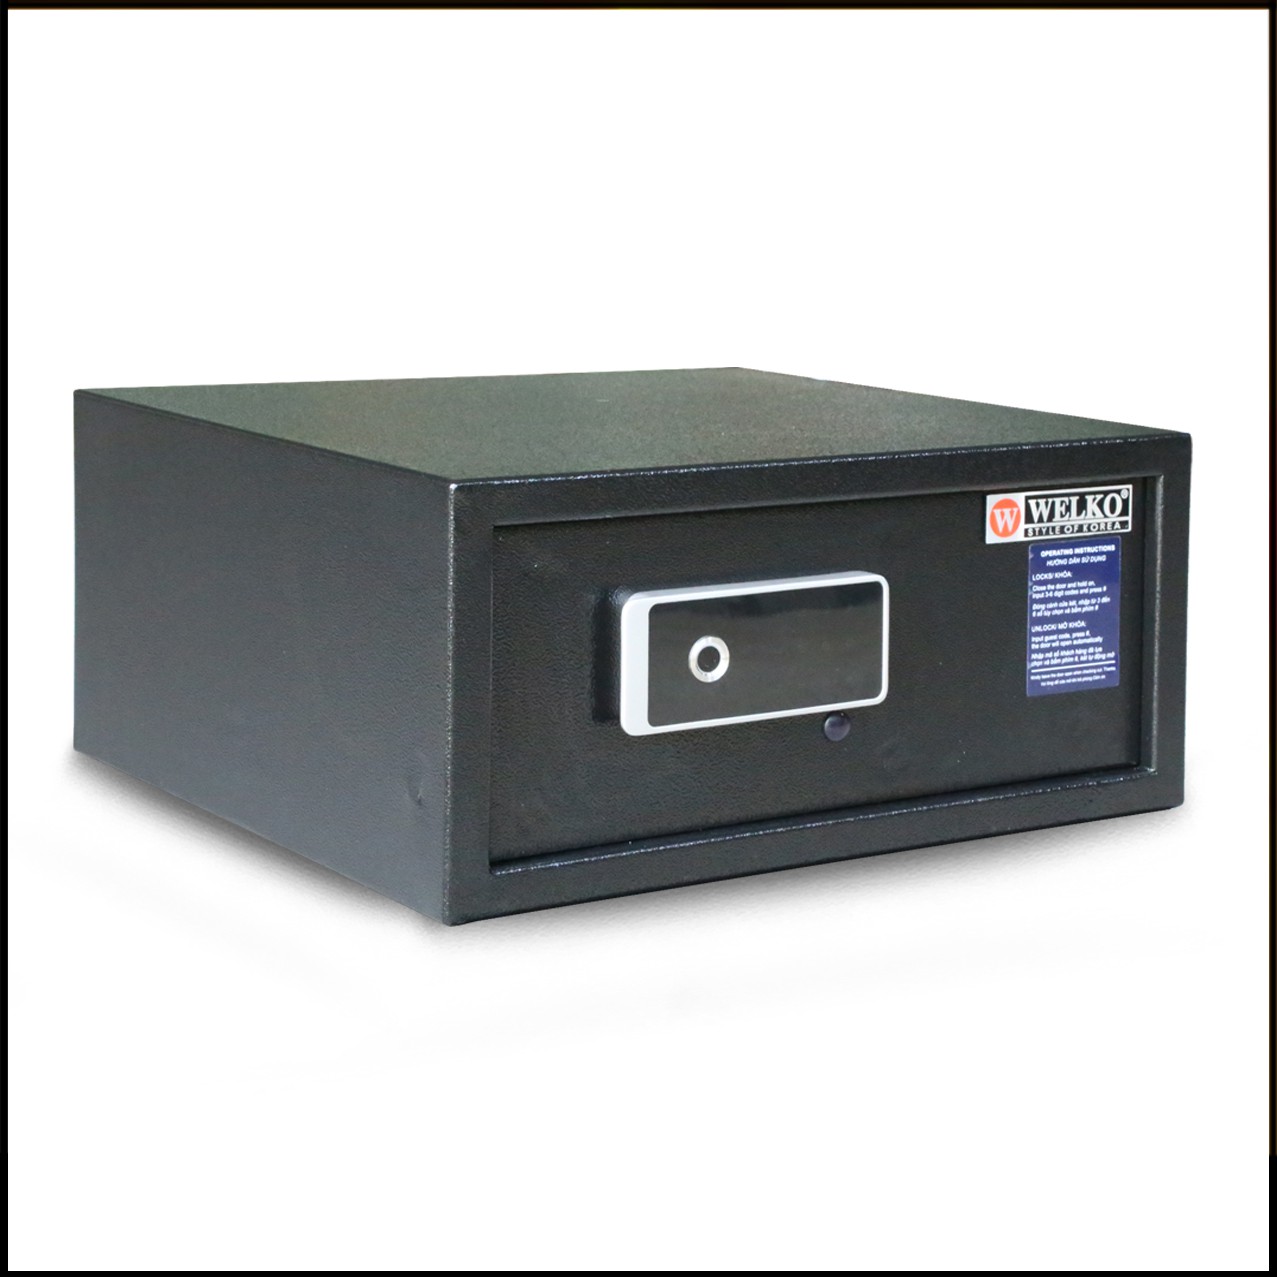 Portable Hotel Safes factory and suppliers - wholesale cheap best